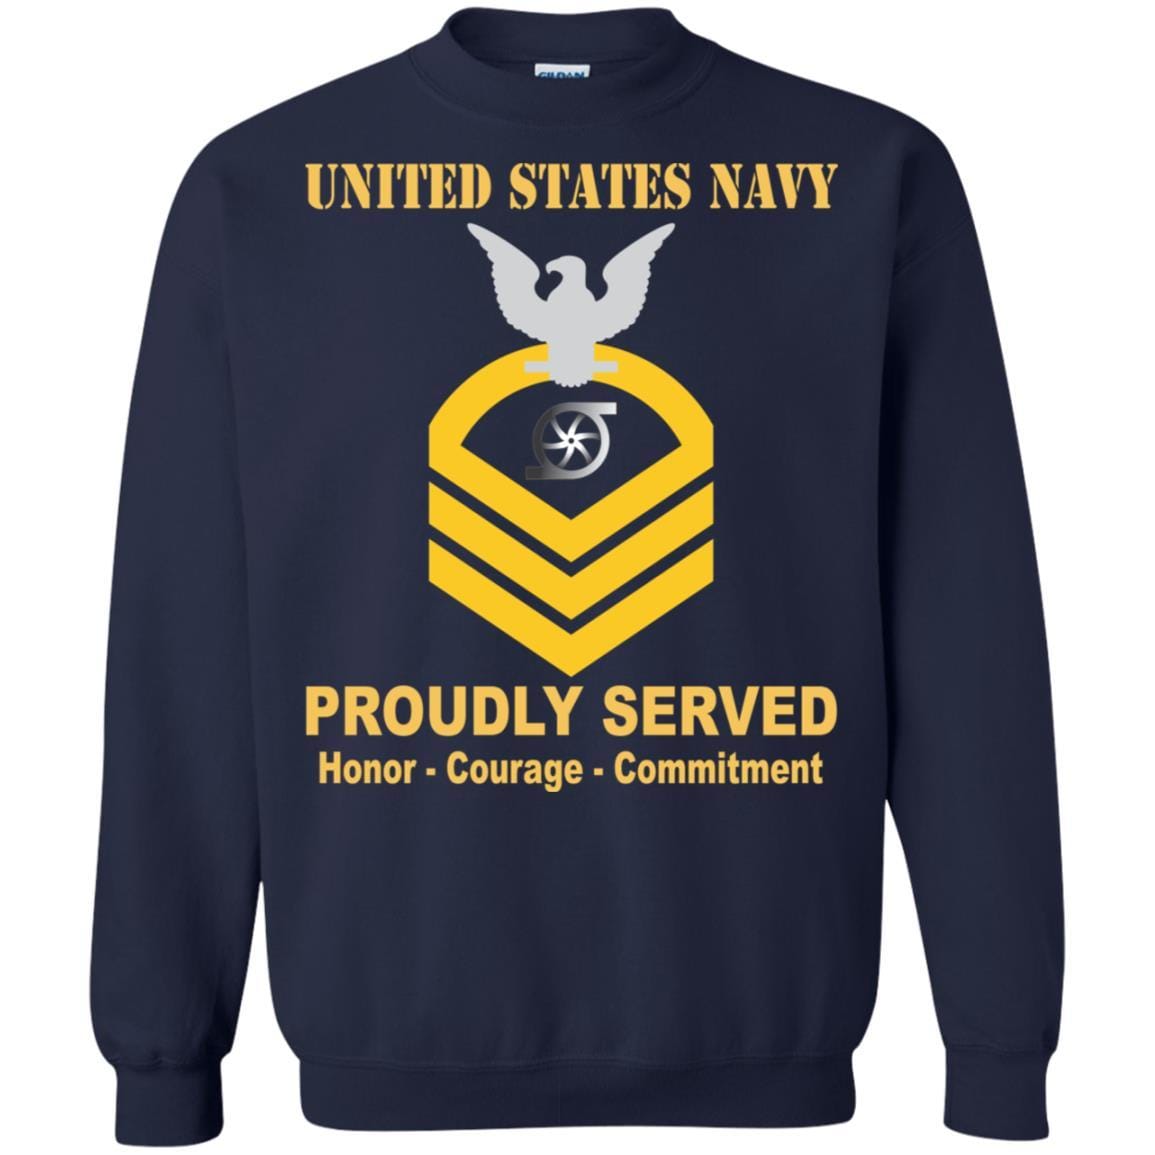 Navy Gas Turbine Systems Technician Navy GS E-7 Rating Badges Proudly Served T-Shirt For Men On Front-TShirt-Navy-Veterans Nation